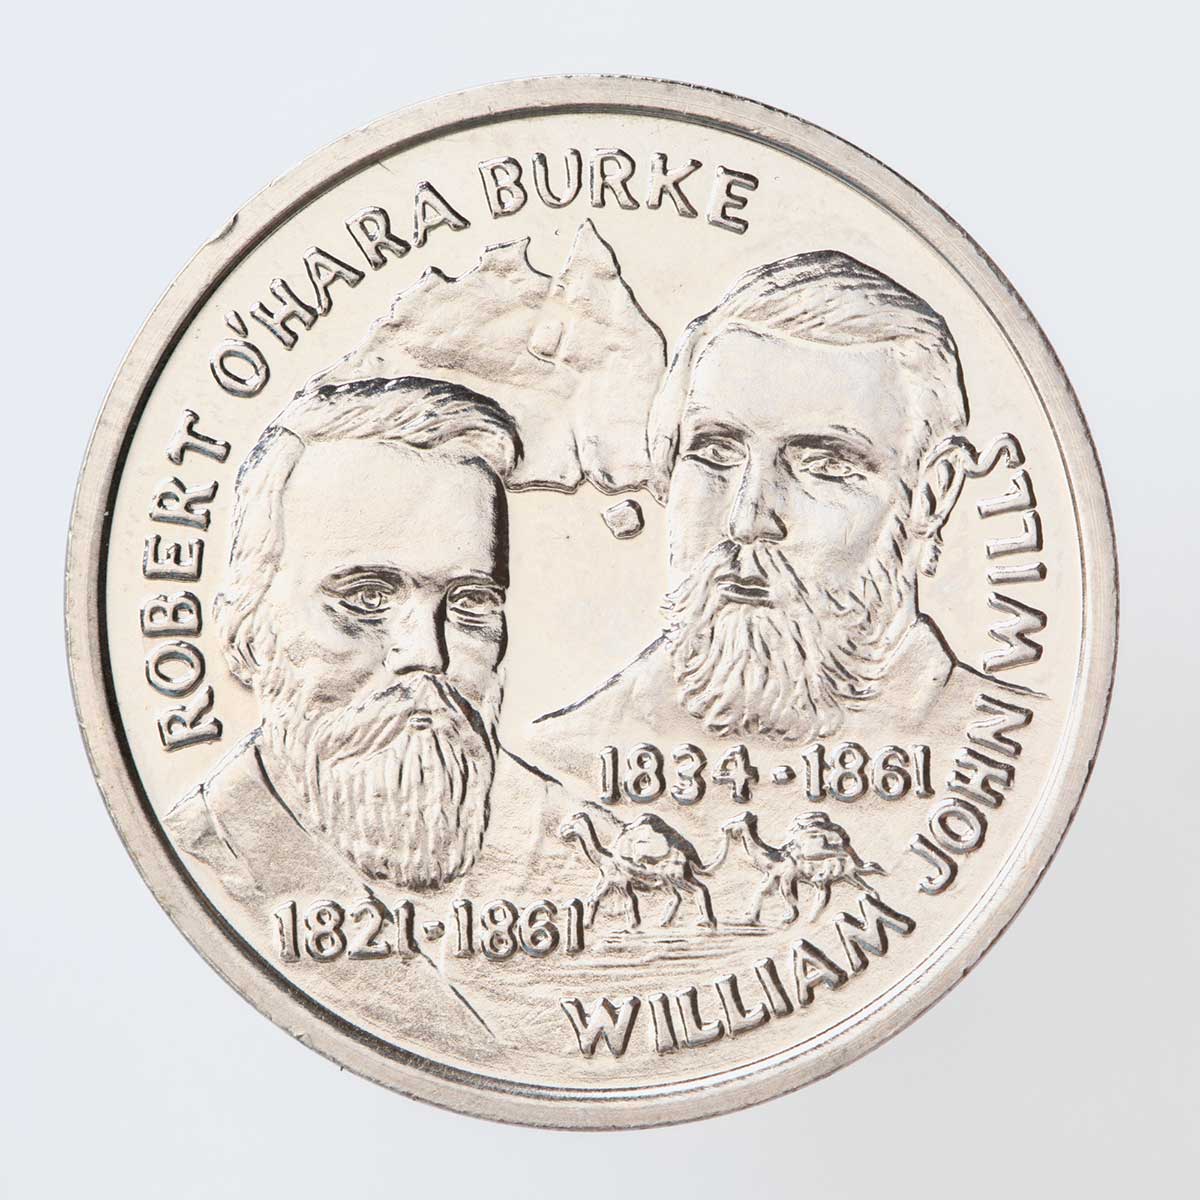 A silver coloured metal commemorative medal depicting the explorers Burke and Wills. The explorers are depicted on the front with their full names and dates written below with a small map of Australia in the background.